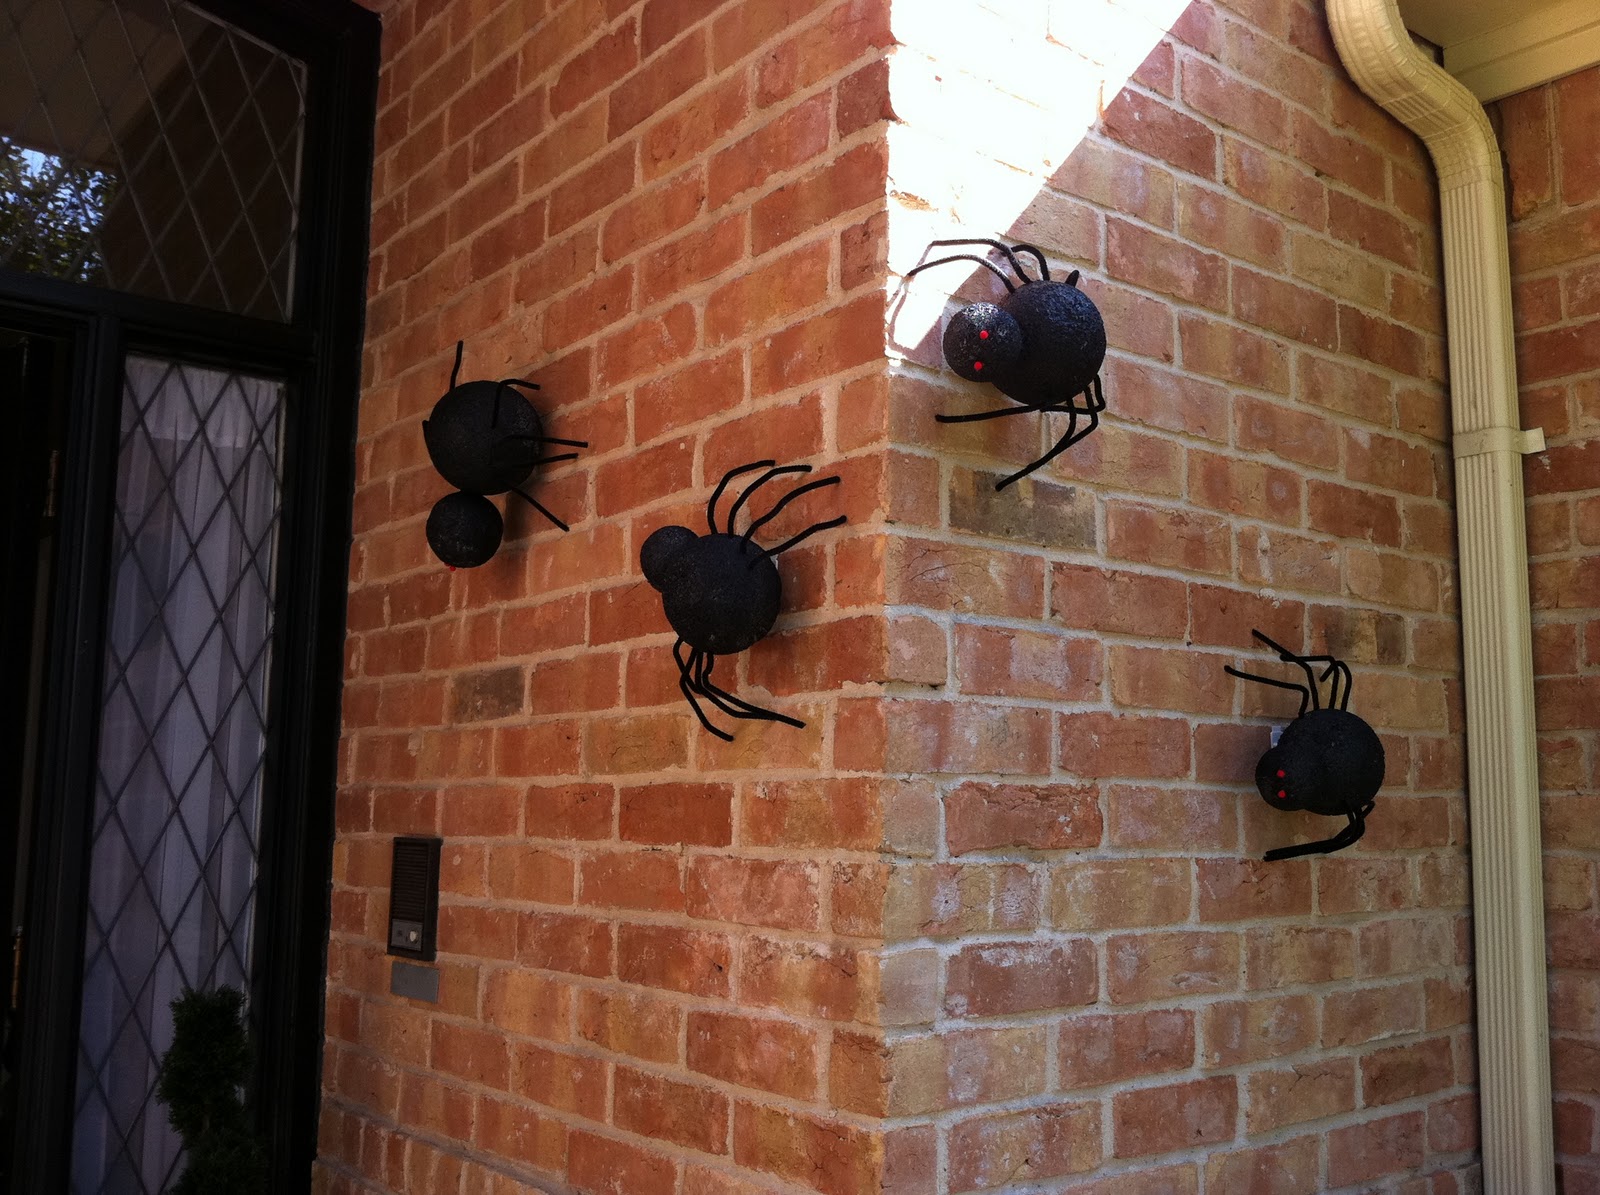 Want to get Crafty?: Repost: Halloween Outdoor Spiders How To Hang Spiders On Brick House